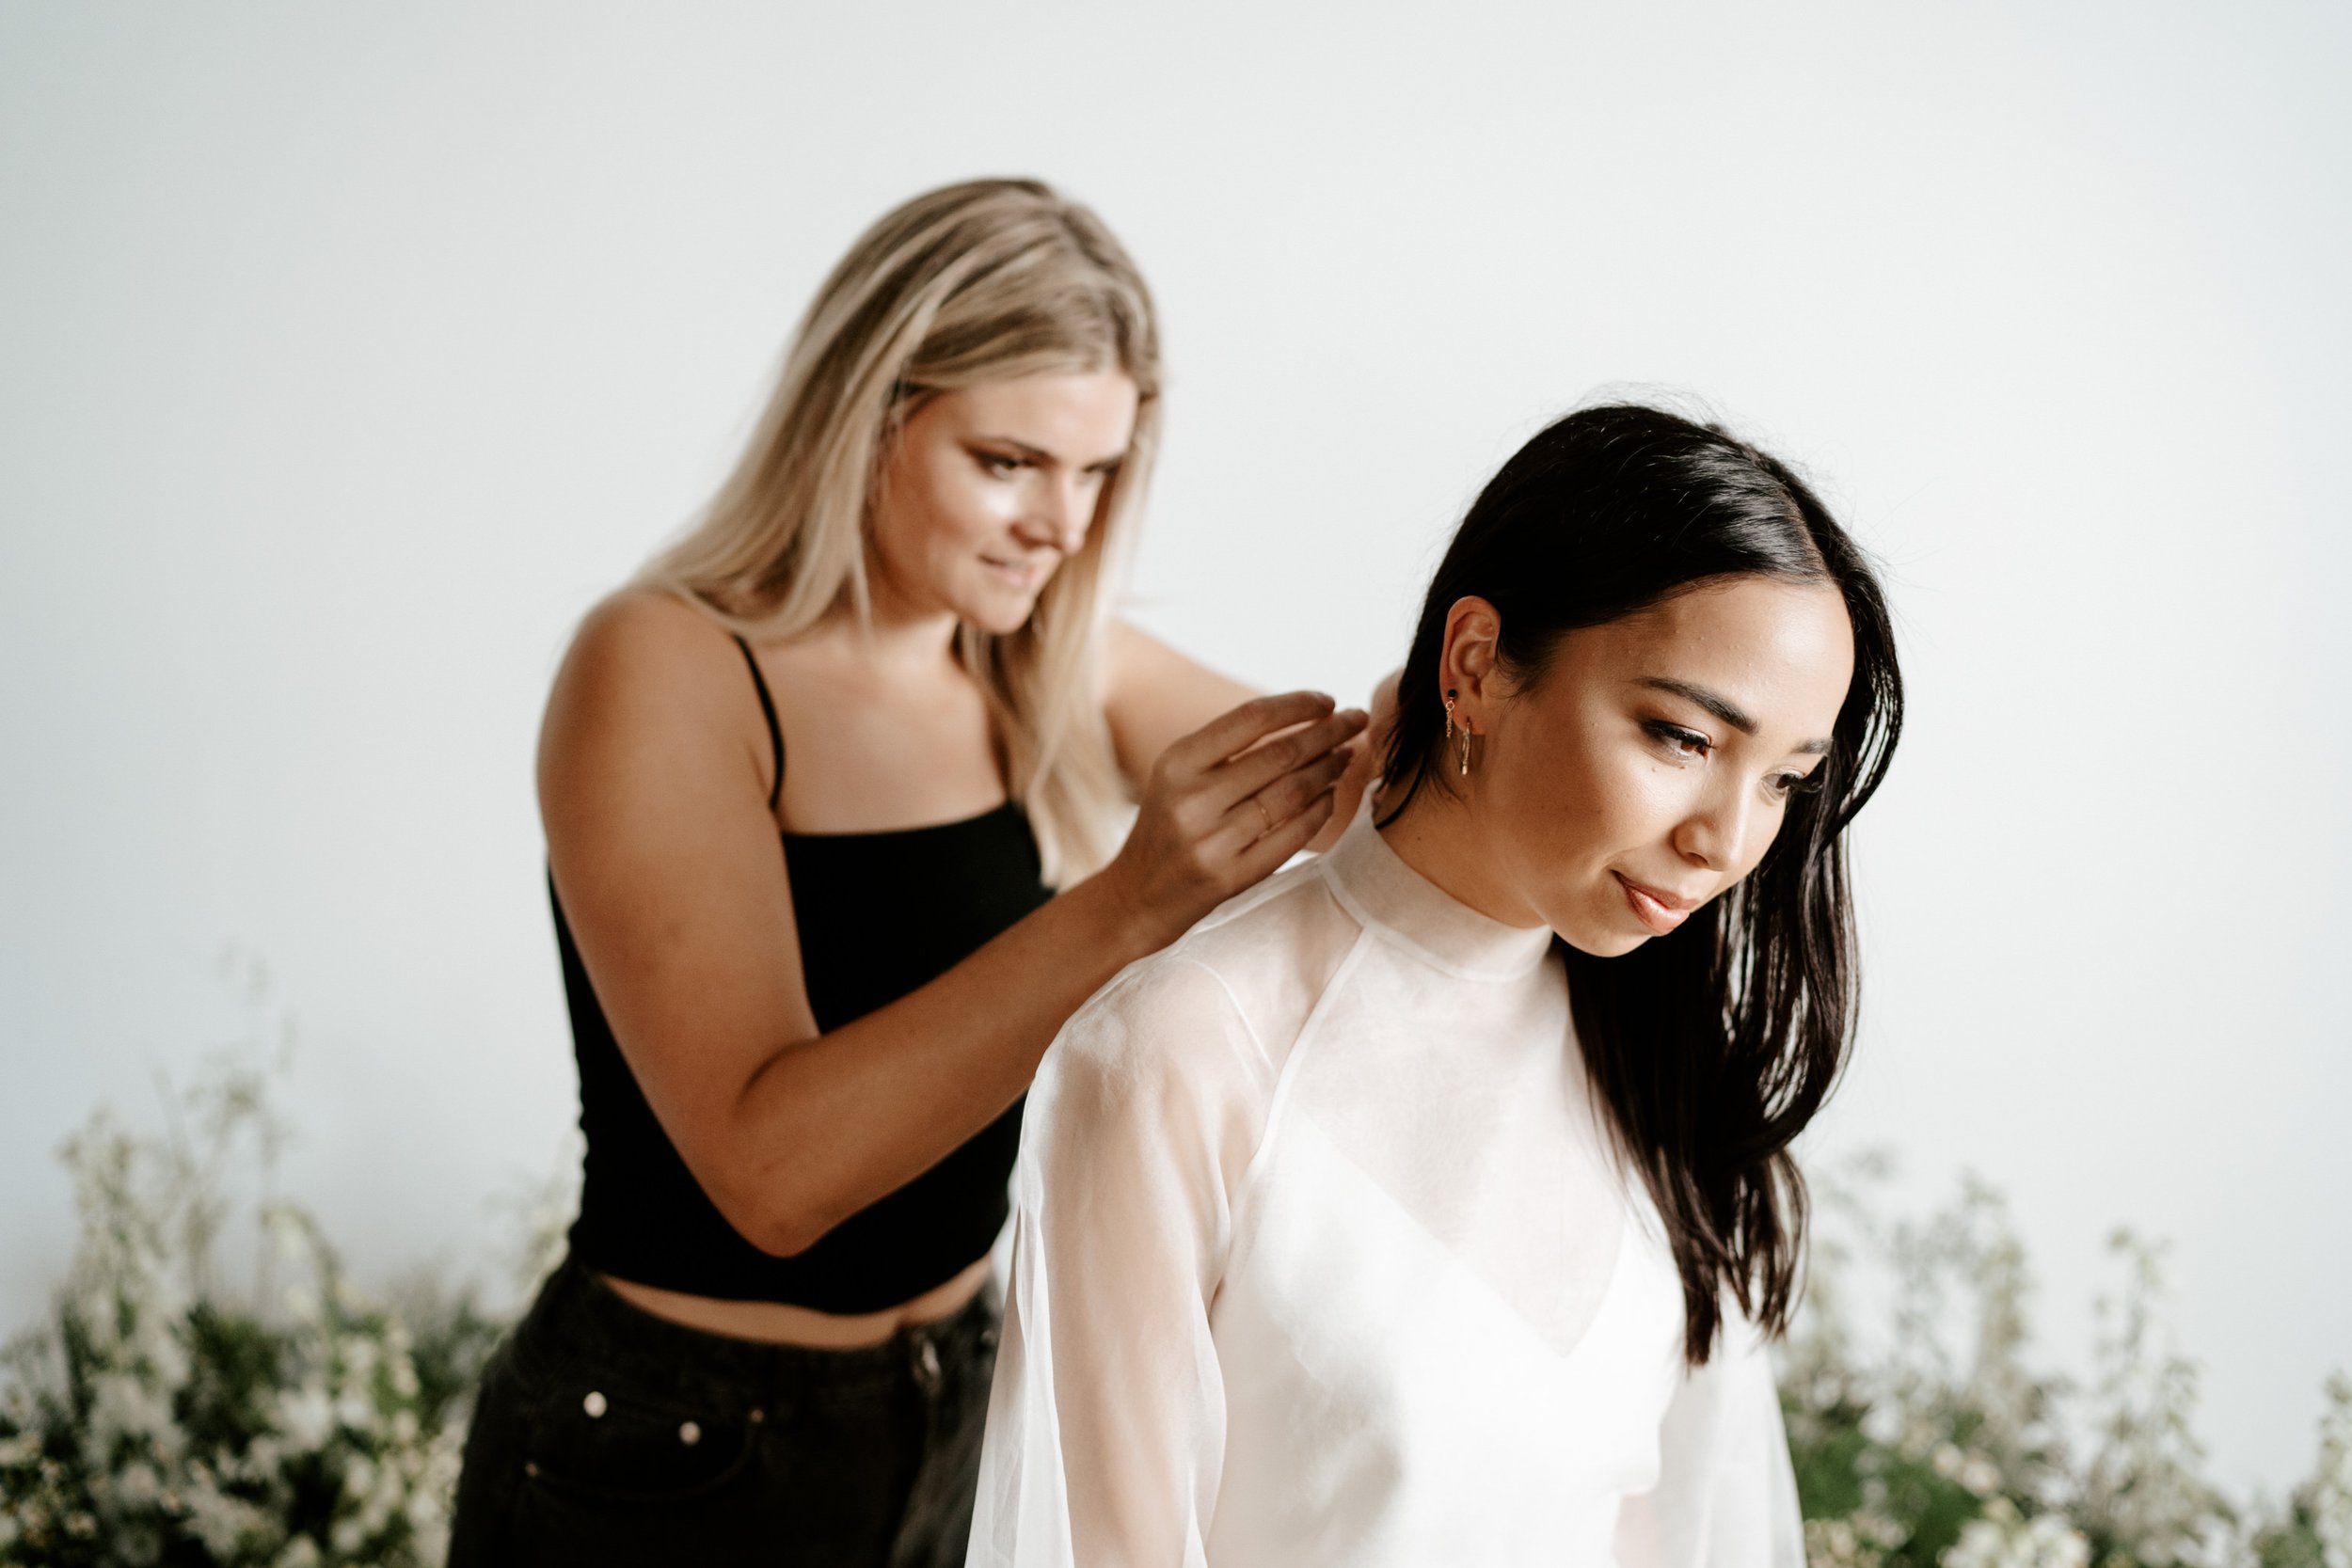 Photoshoot behind the scenes - Brisbane Spring Wedding Inspiration - Trent and Jessie Photography and Videography